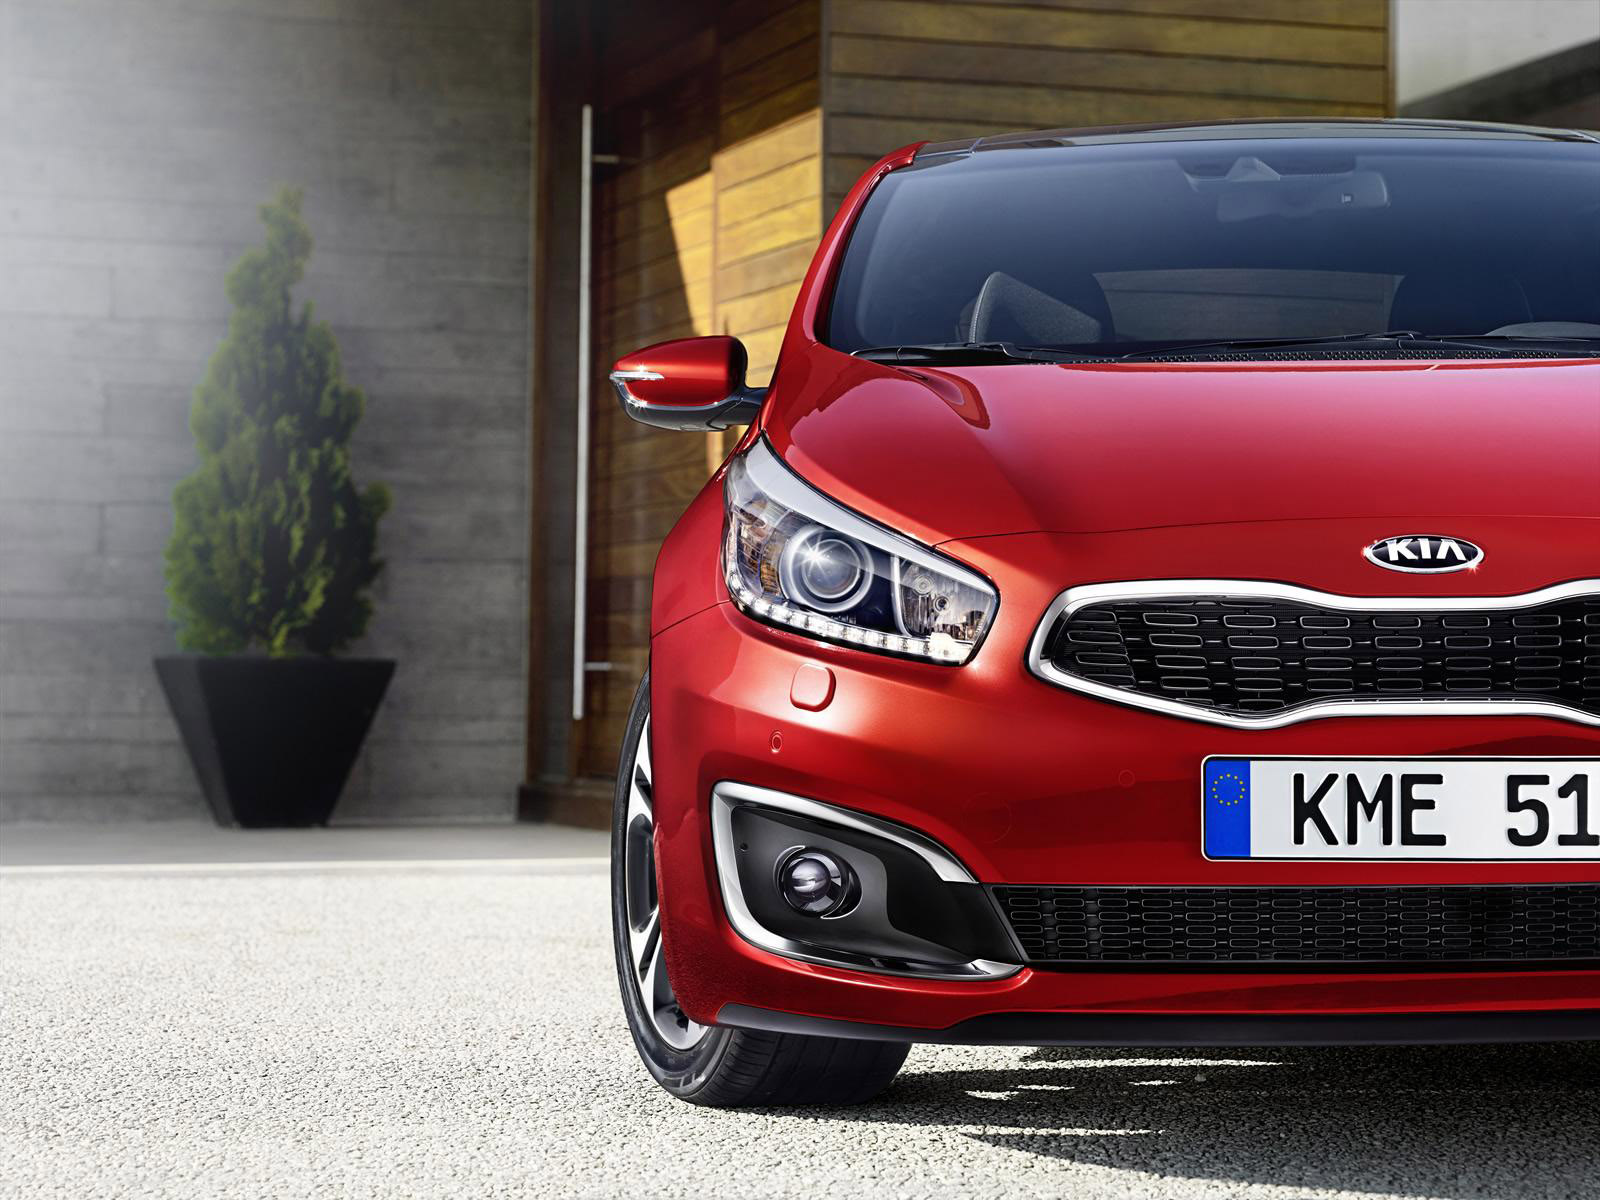 2016 Kia cee'd Facelift Debuts with Minor Styling Updates and New Engine